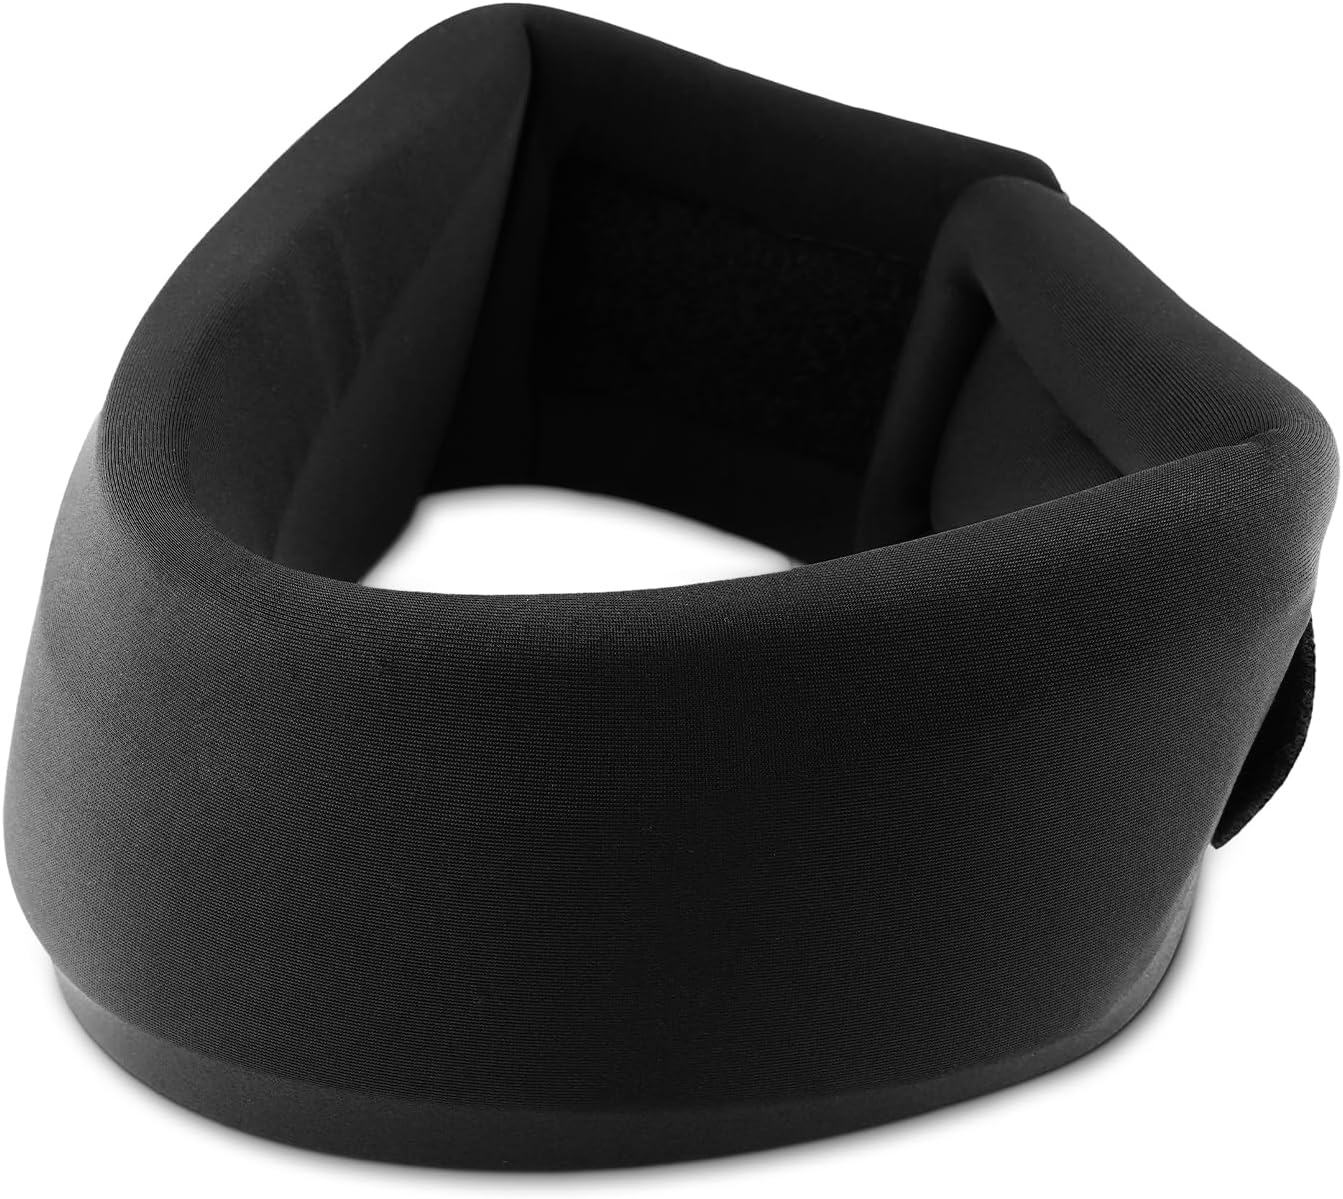 Soft Foam Neck Brace Cervical Collar-Hotodeal Neck Brace for Neck Pain and Support